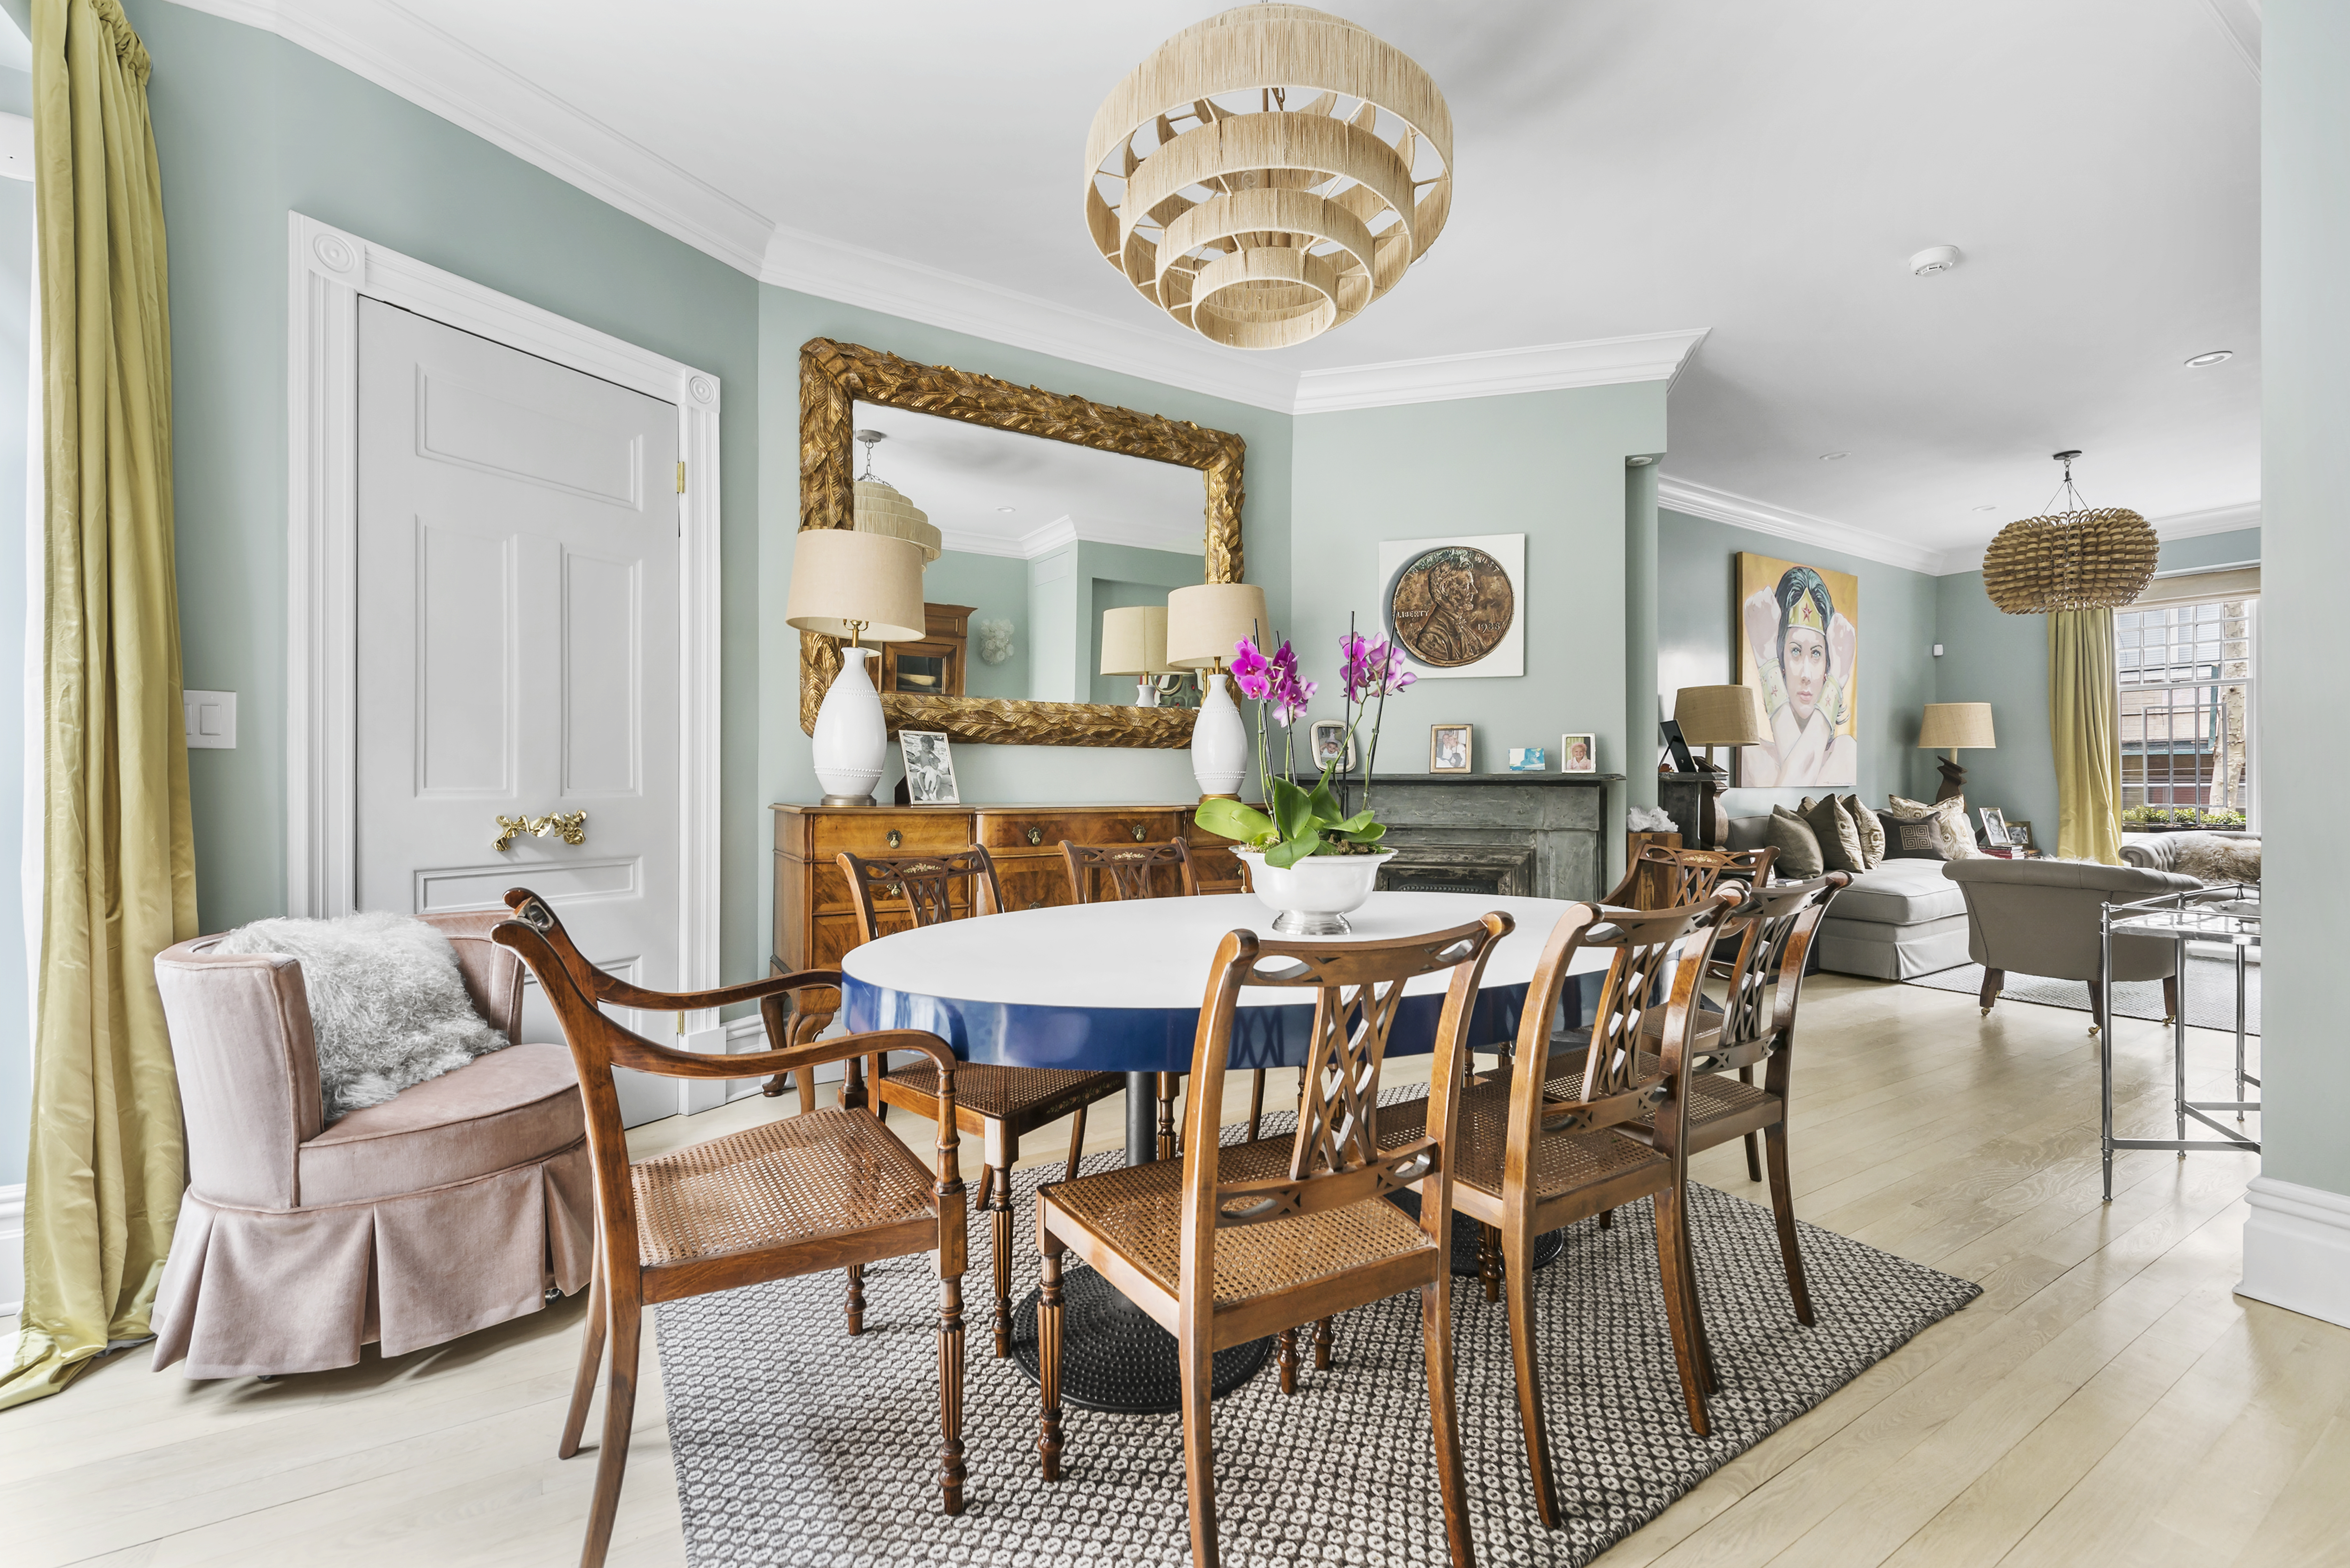 A dining area with a round table, light blue walls, crown moldings, and hardwood floors.